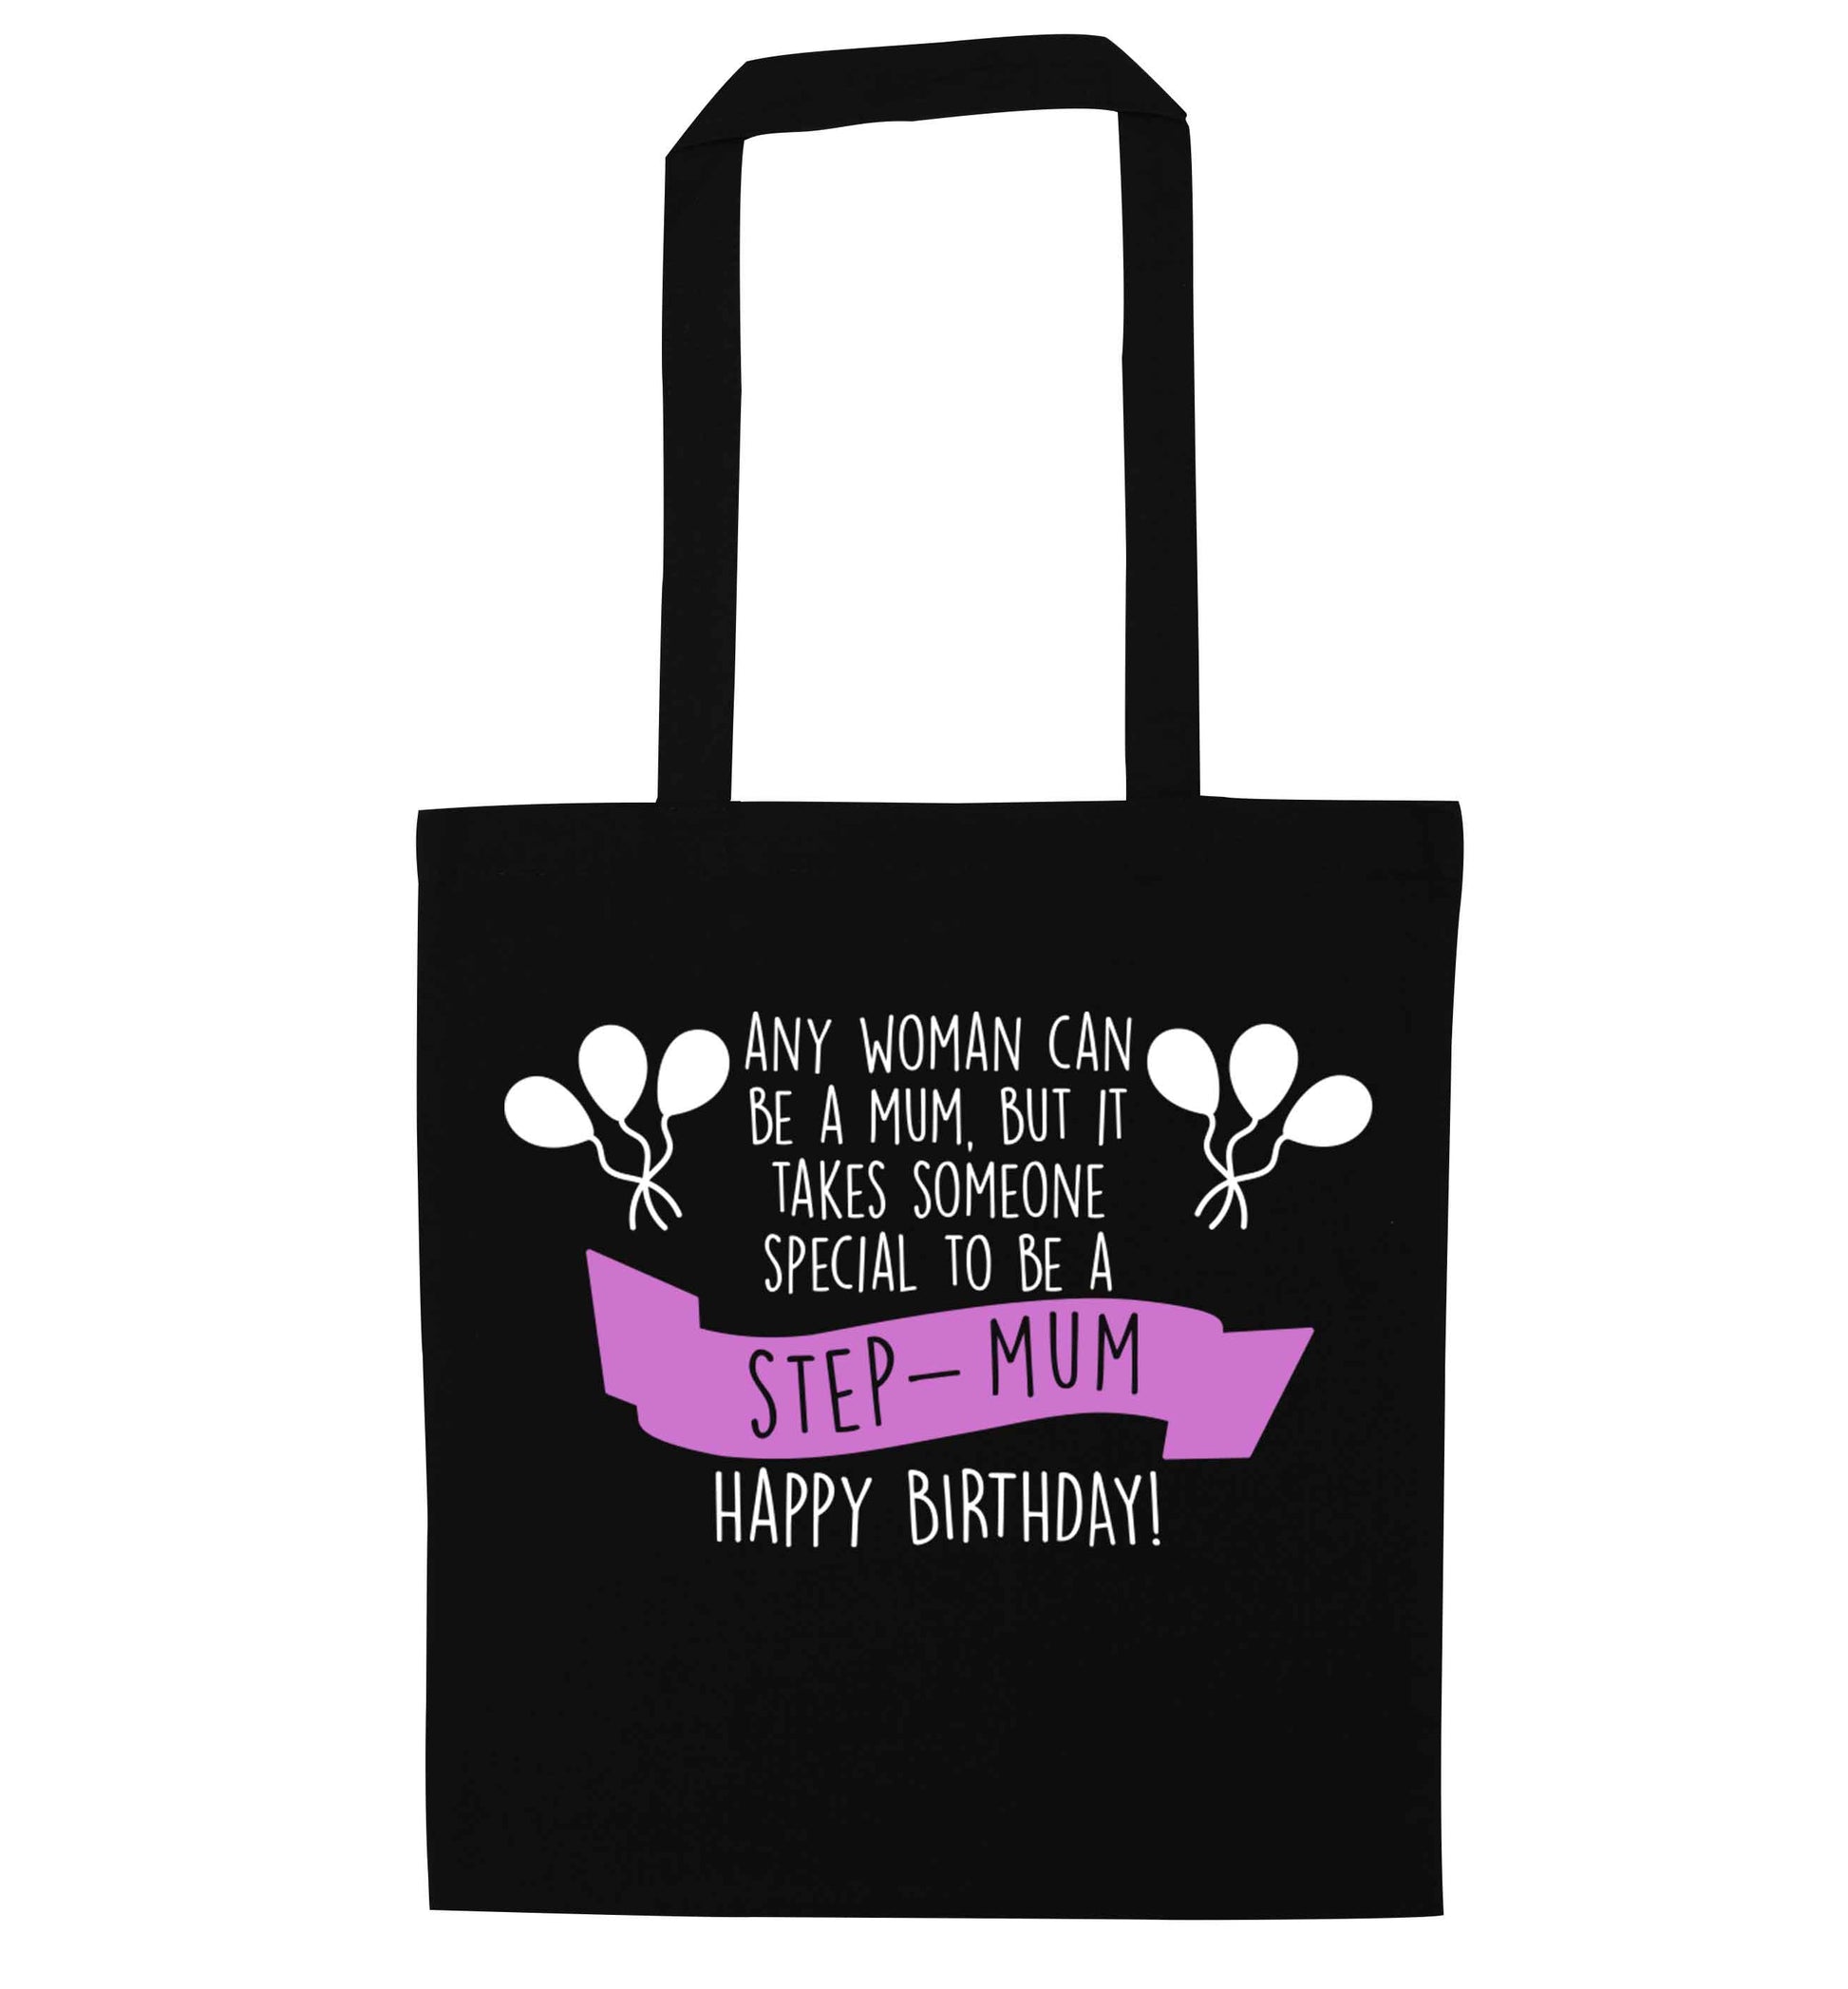 Takes someone special to be a step-mum, happy birthday! black tote bag